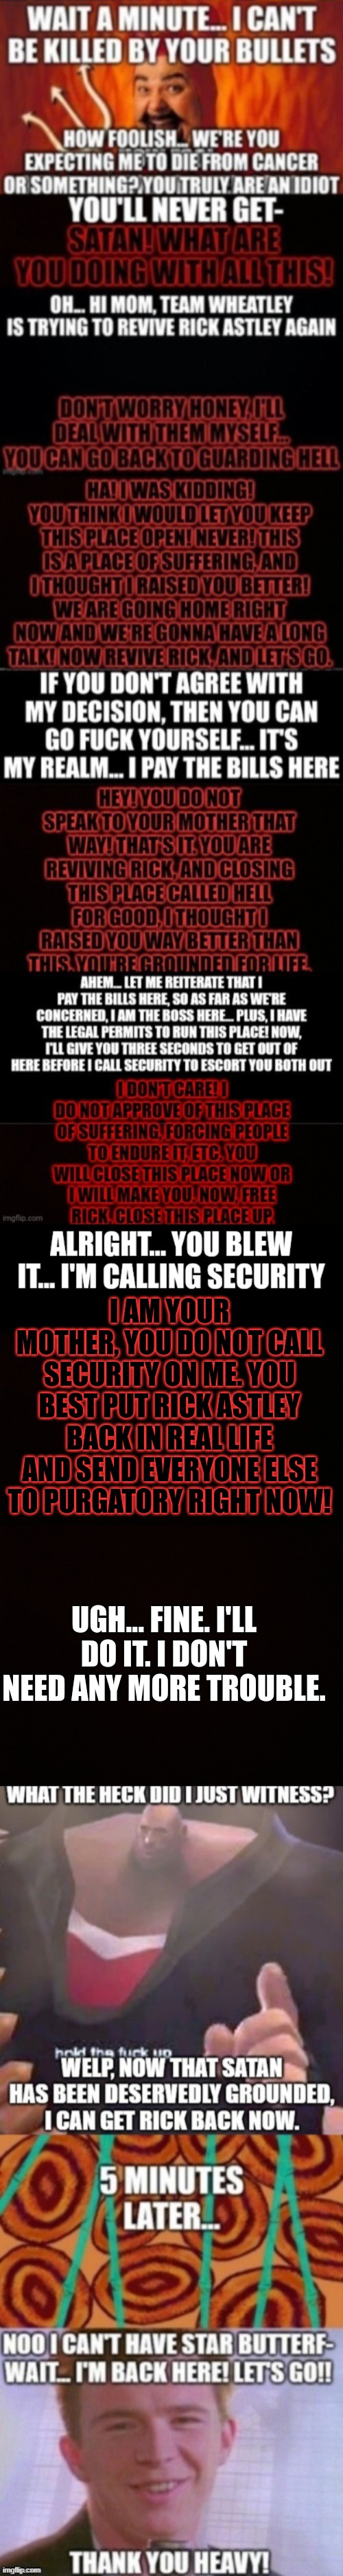 Satan changes for the better | I AM YOUR MOTHER, YOU DO NOT CALL SECURITY ON ME. YOU BEST PUT RICK ASTLEY BACK IN REAL LIFE AND SEND EVERYONE ELSE TO PURGATORY RIGHT NOW! UGH... FINE. I'LL DO IT. I DON'T NEED ANY MORE TROUBLE. | image tagged in blank censor | made w/ Imgflip meme maker